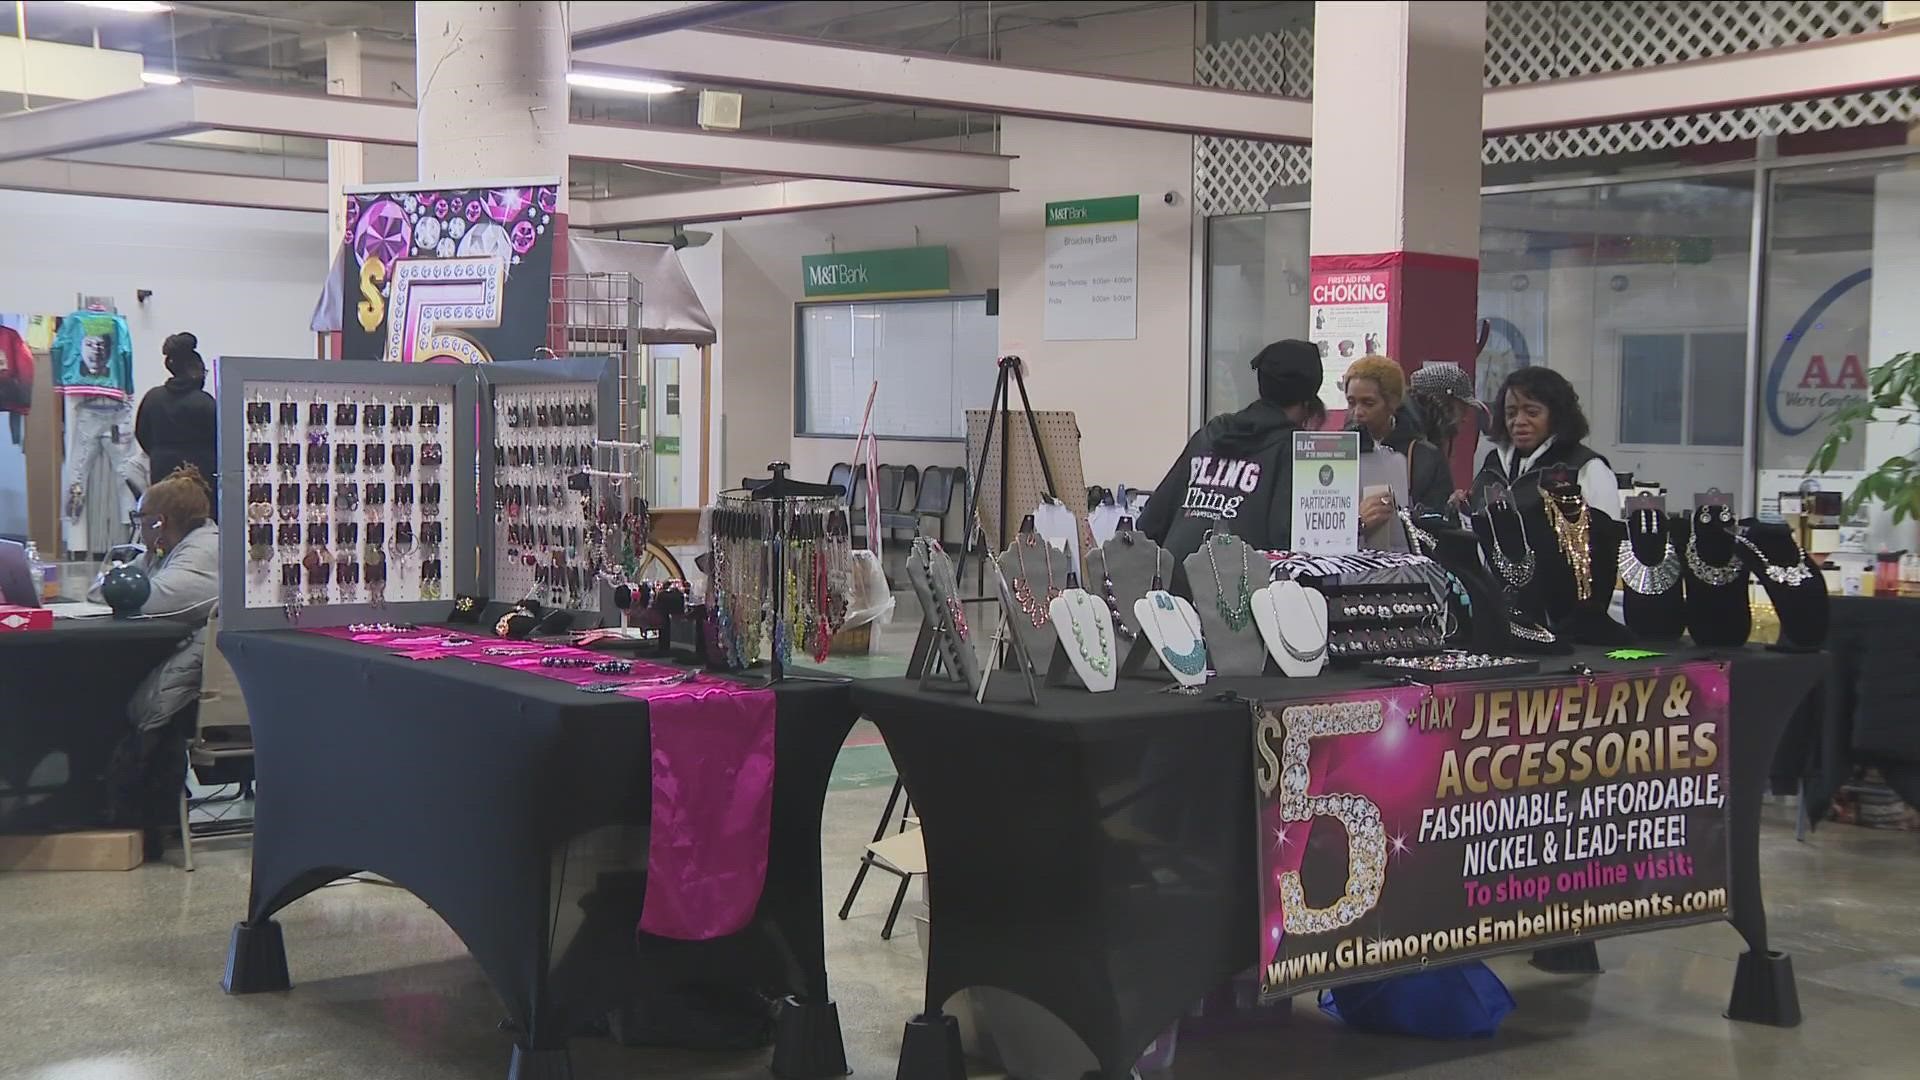 Every Saturday this month you will find Buy Black Buffalo retail vendors. Nearly 2 dozen businesses have set up shop there.